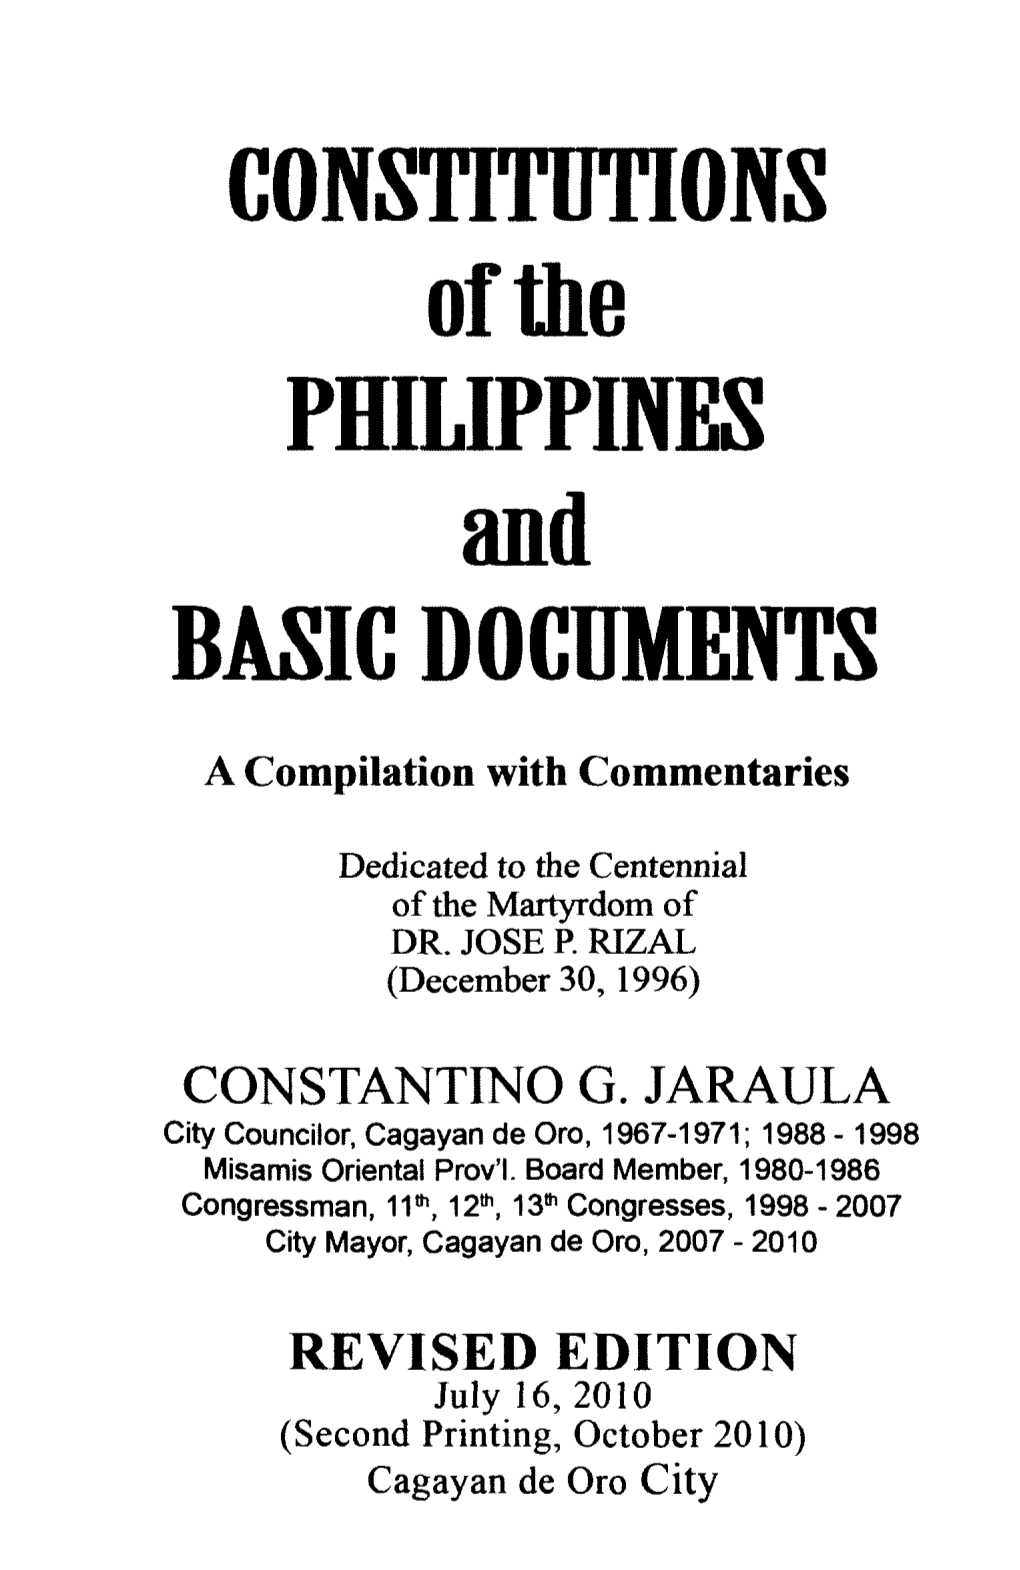 CONSTITUTIONS of the PHILIPPINES and BASIC DOCUMENTS